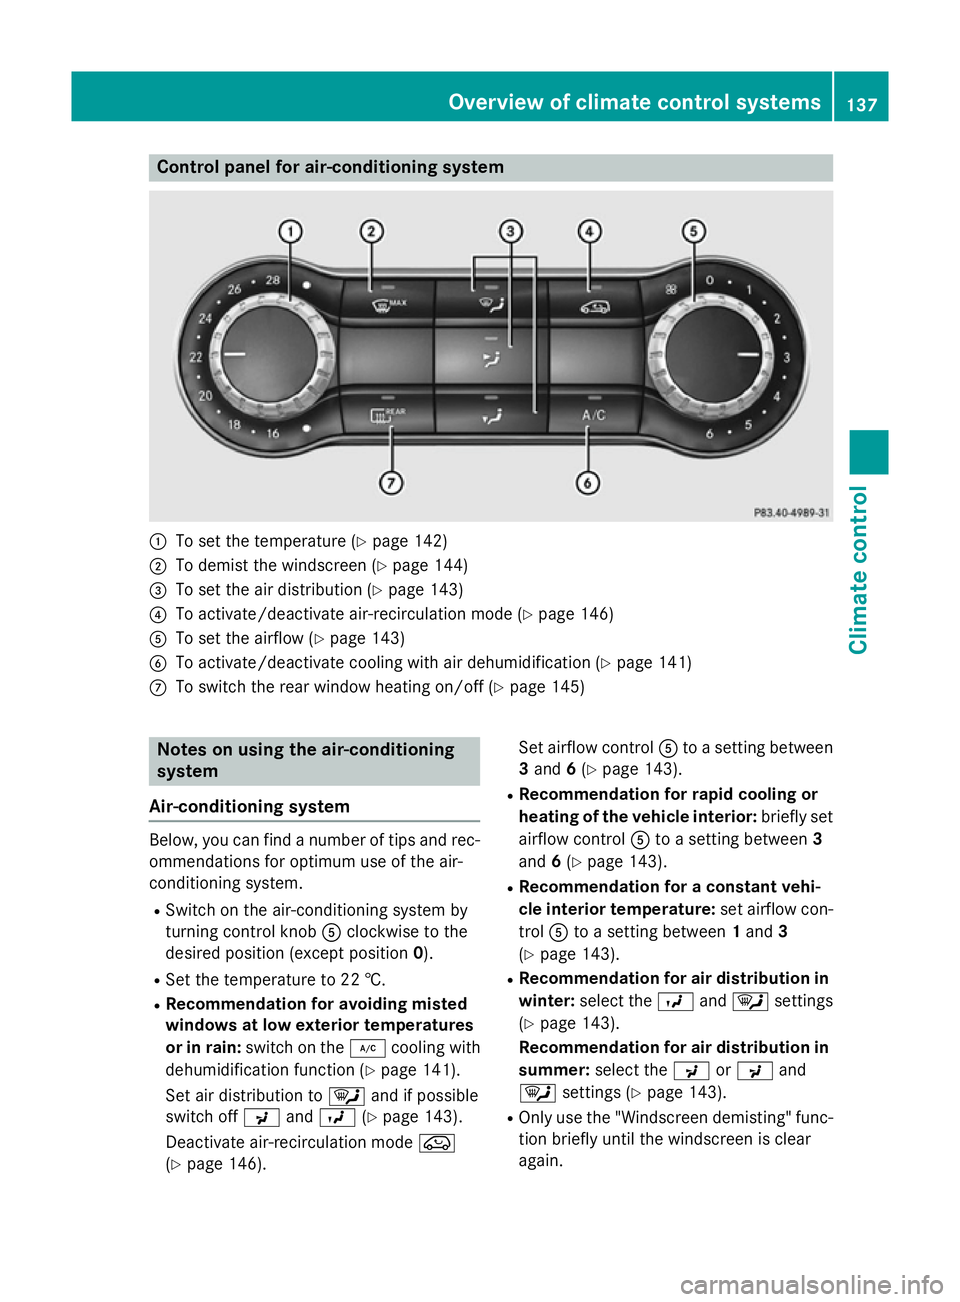 MERCEDES-BENZ A-CLASS HATCHBACK 2015  Owners Manual Control panel for air-conditioning system
:
To set the temperature (Y page 142)
; To demist the windscreen (Y page 144)
= To set the air distribution (Y page 143)
? To activate/deactivate air-recircul